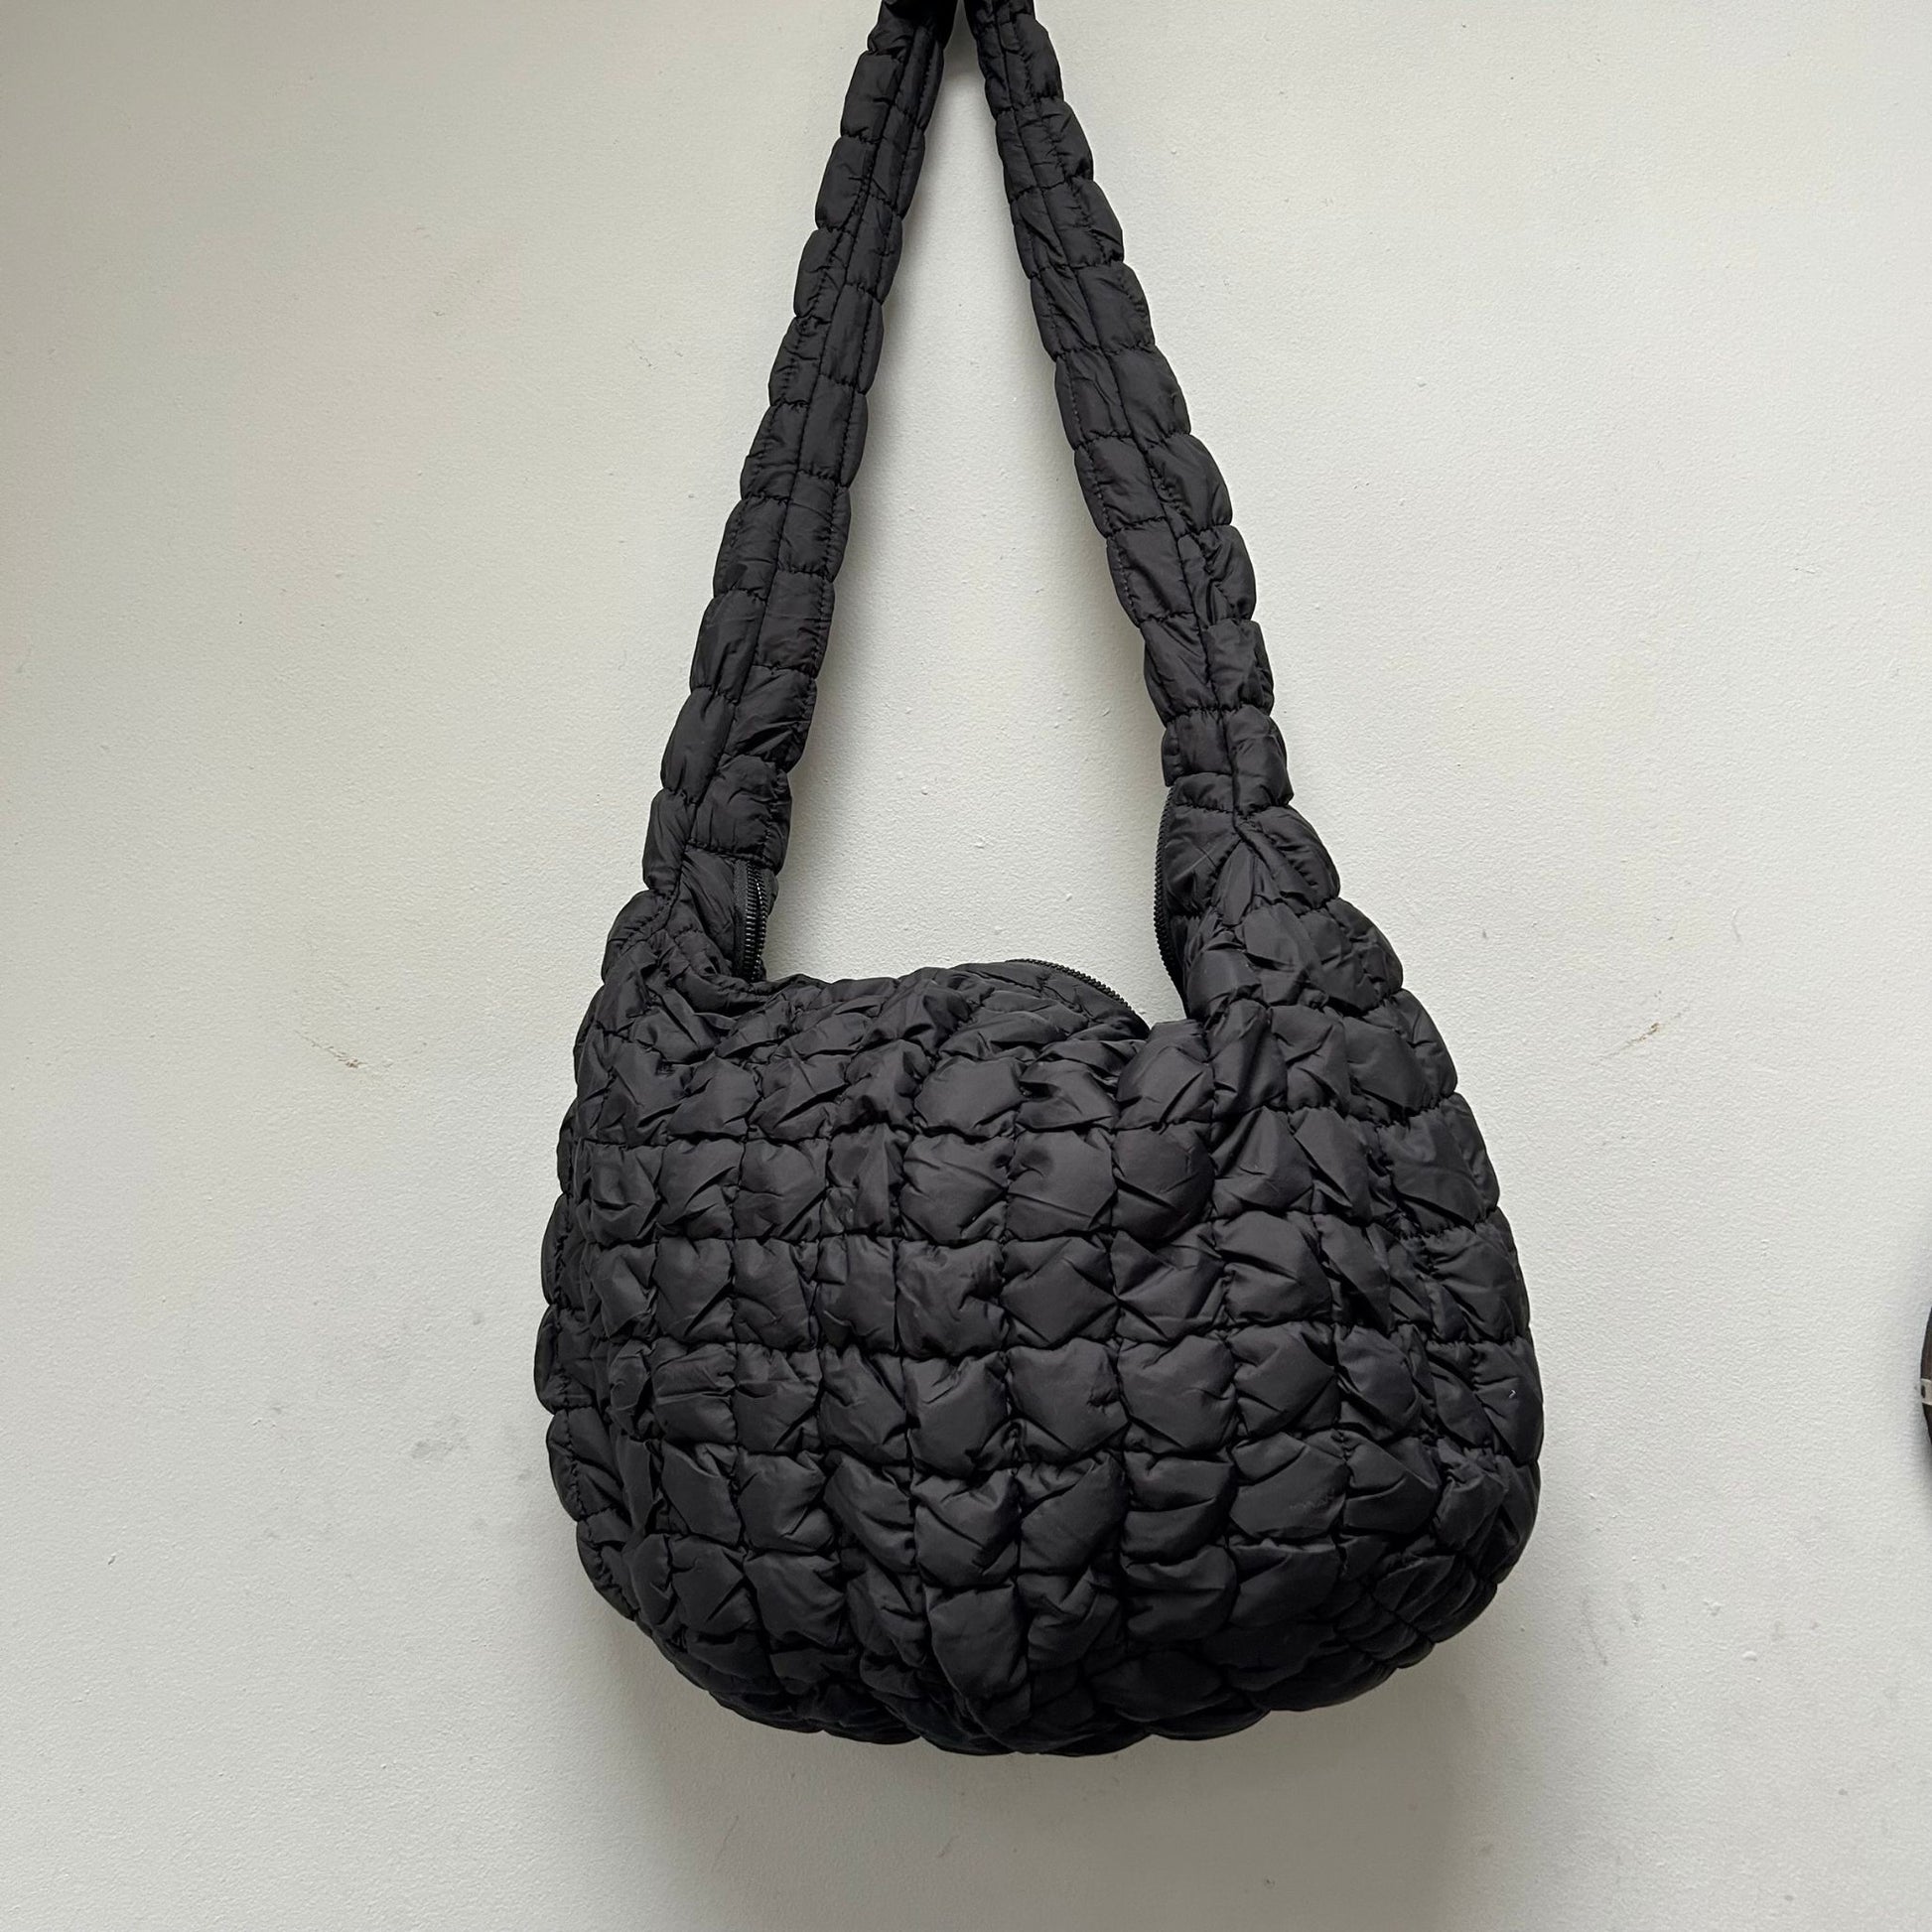 Oversized Quilted Cross-Body bag in textured black, perfect for any occasion.